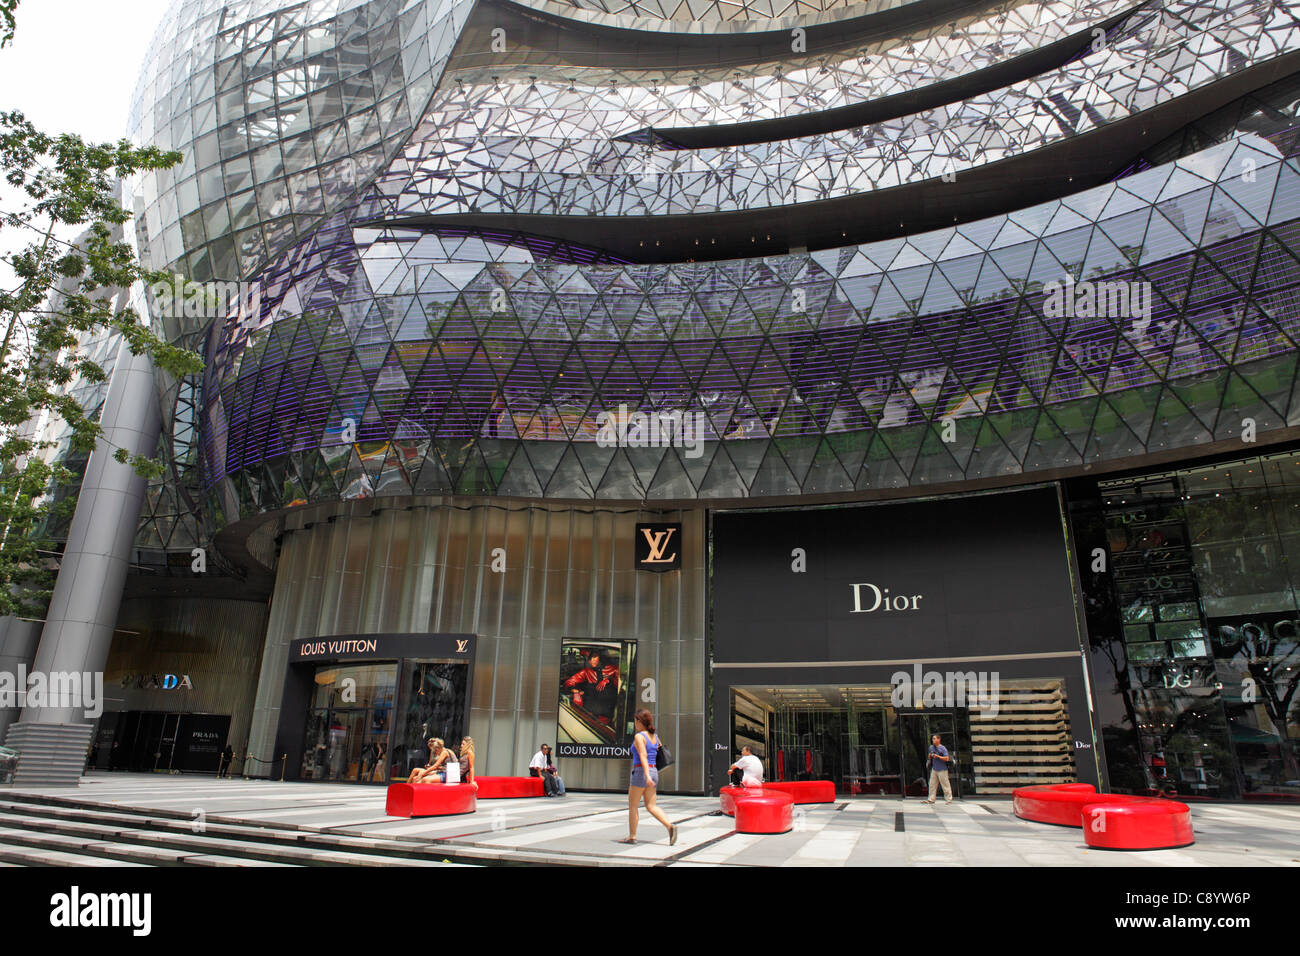 Orchard, Singapore - April 14, 2013: Louis Vuitton Product Displayed On Ion  Orchard Mall, Singapore. Stock Photo, Picture and Royalty Free Image. Image  31381876.